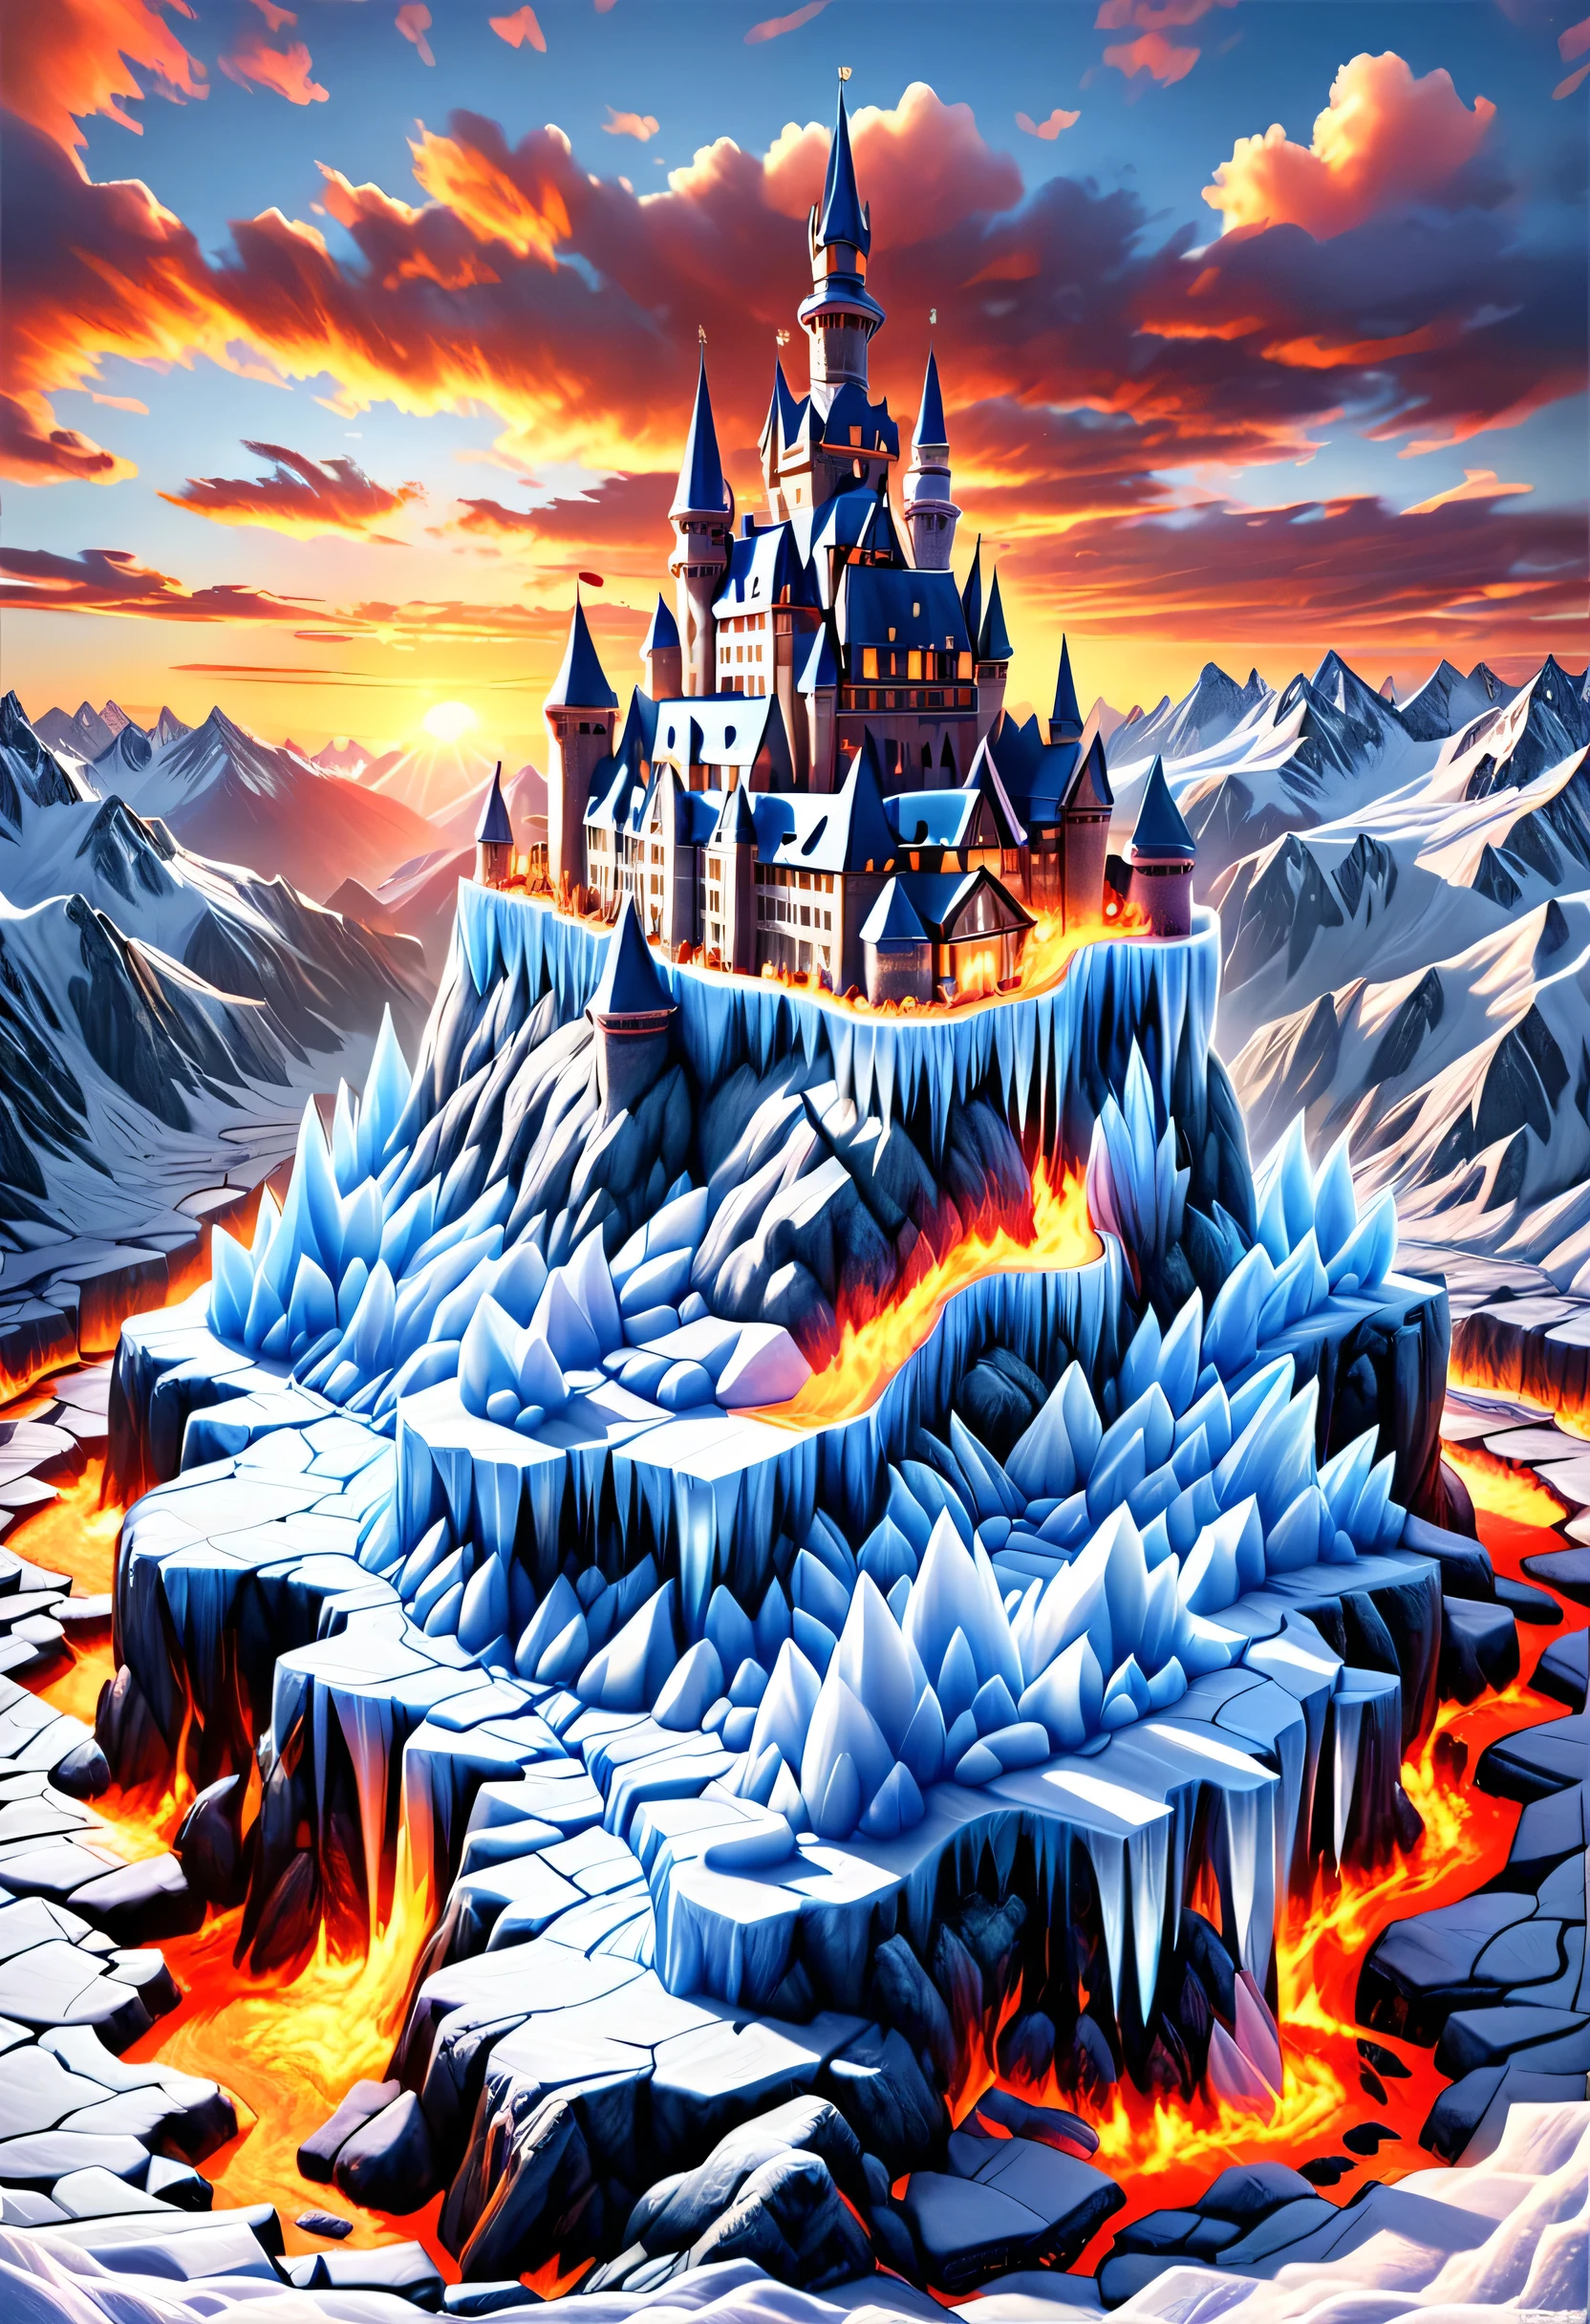 a panoramic award winning photography, Photorealistic, extremely detailed of a castle made from (ice: 1.3) made_of_ice standing on the peak of a snowy mountain, an impressive best detailed castle made from ice (Photorealistic, extremely detailed), with towers, bridges, a moat filled with lava (Photorealistic, extremely detailed),  standing on top of a snowy mountain (masterpiece, extremely detailed, best quality), with pine trees, sunset light, some clouds in the air,  alpine mountain range background, best realistic, best details, best quality, 16k, [ultra detailed], masterpiece, best quality, (extremely detailed), ultra wide shot, photorealism, depth of field, faize